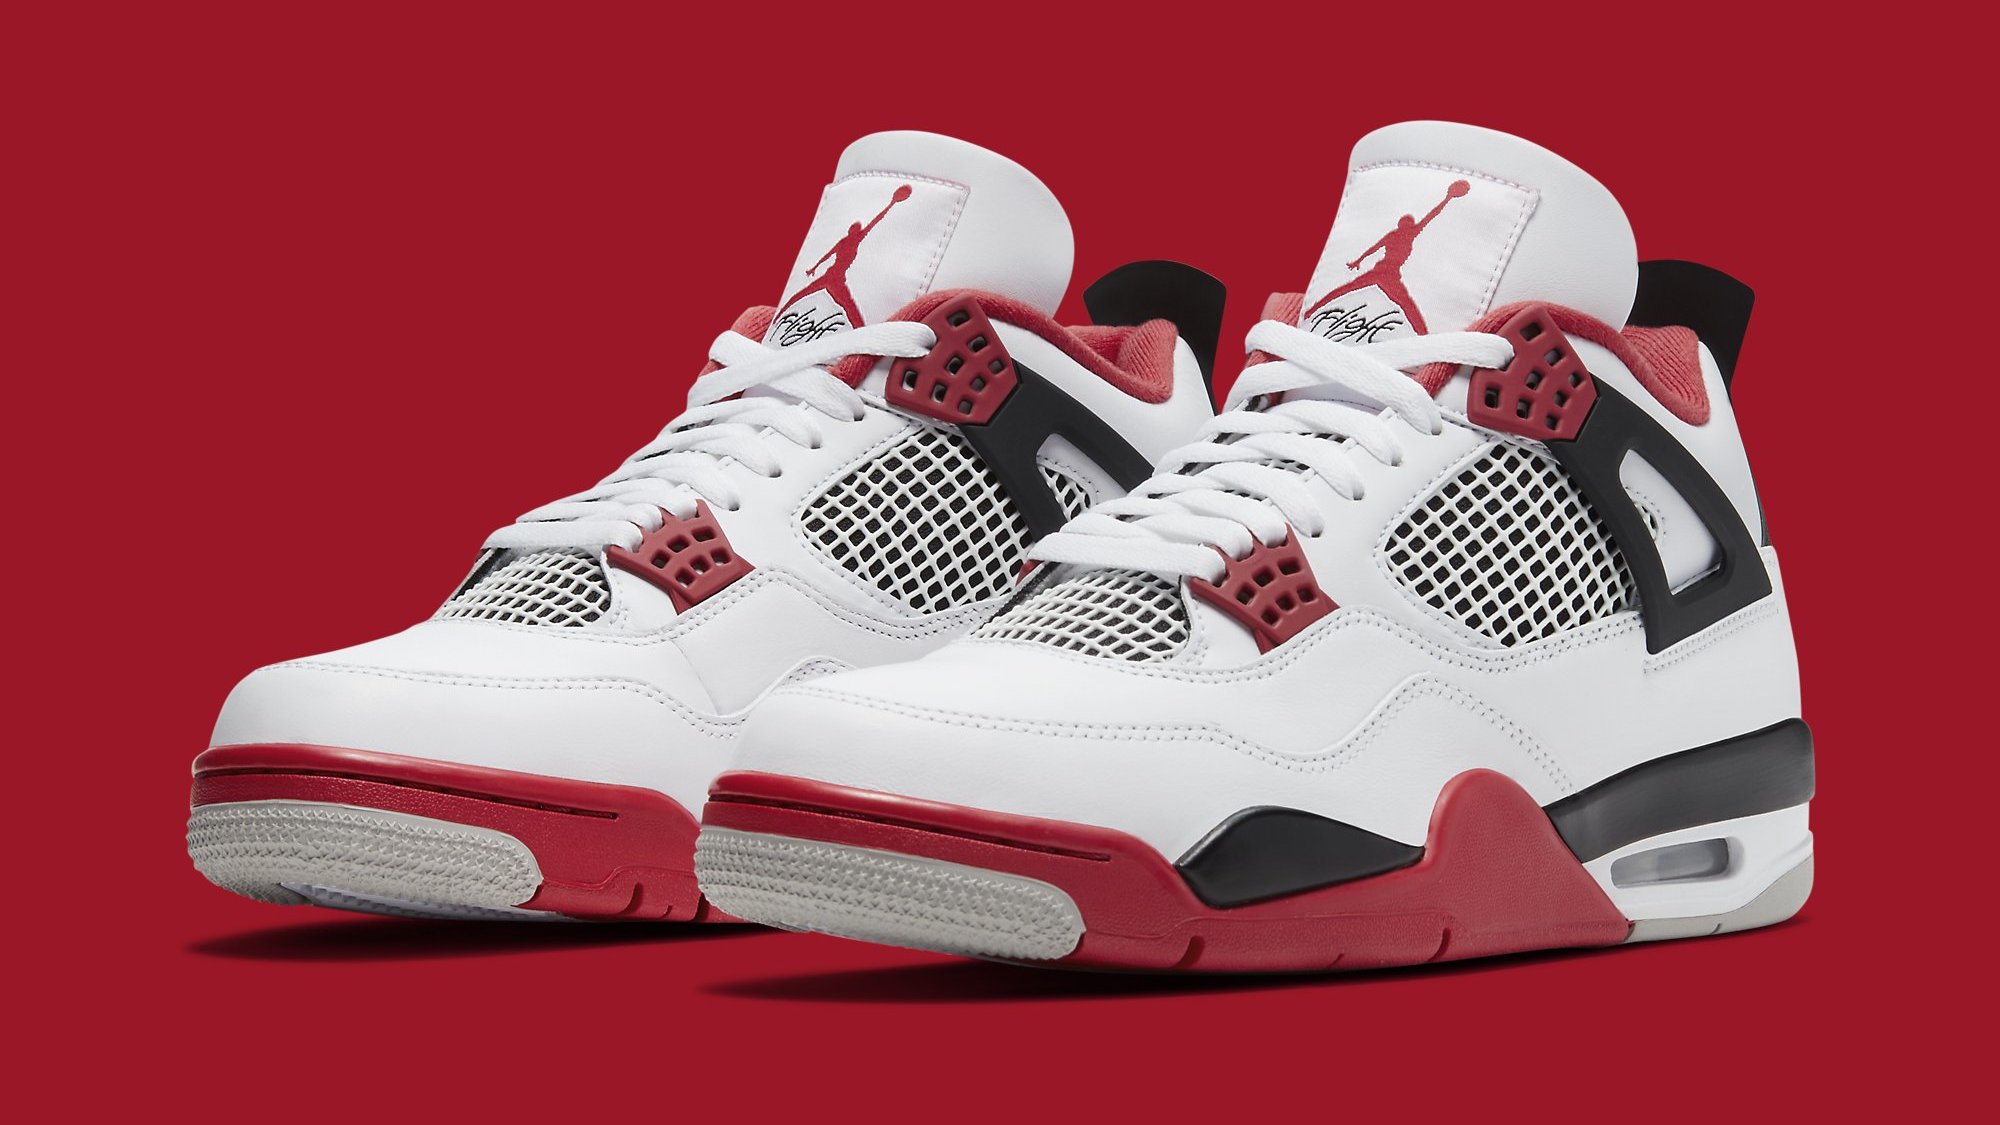 Best Look Yet at This Year's 'Fire Red' Air Jordan 4 Retro | Complex